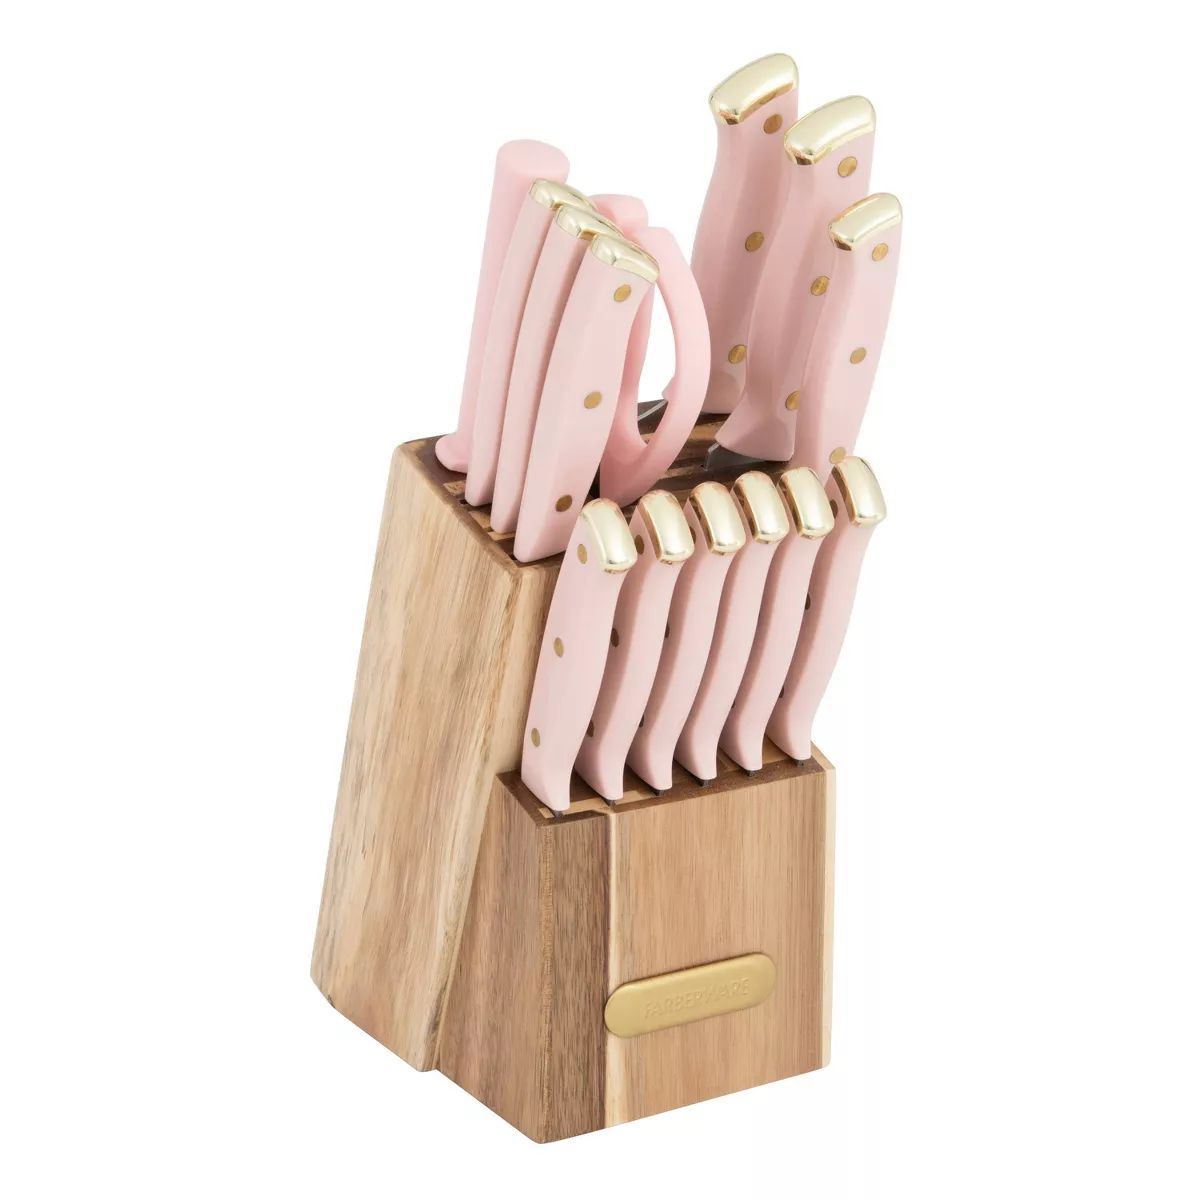 Farberware 15pc Cutlery Set - Gold and Blush | Target